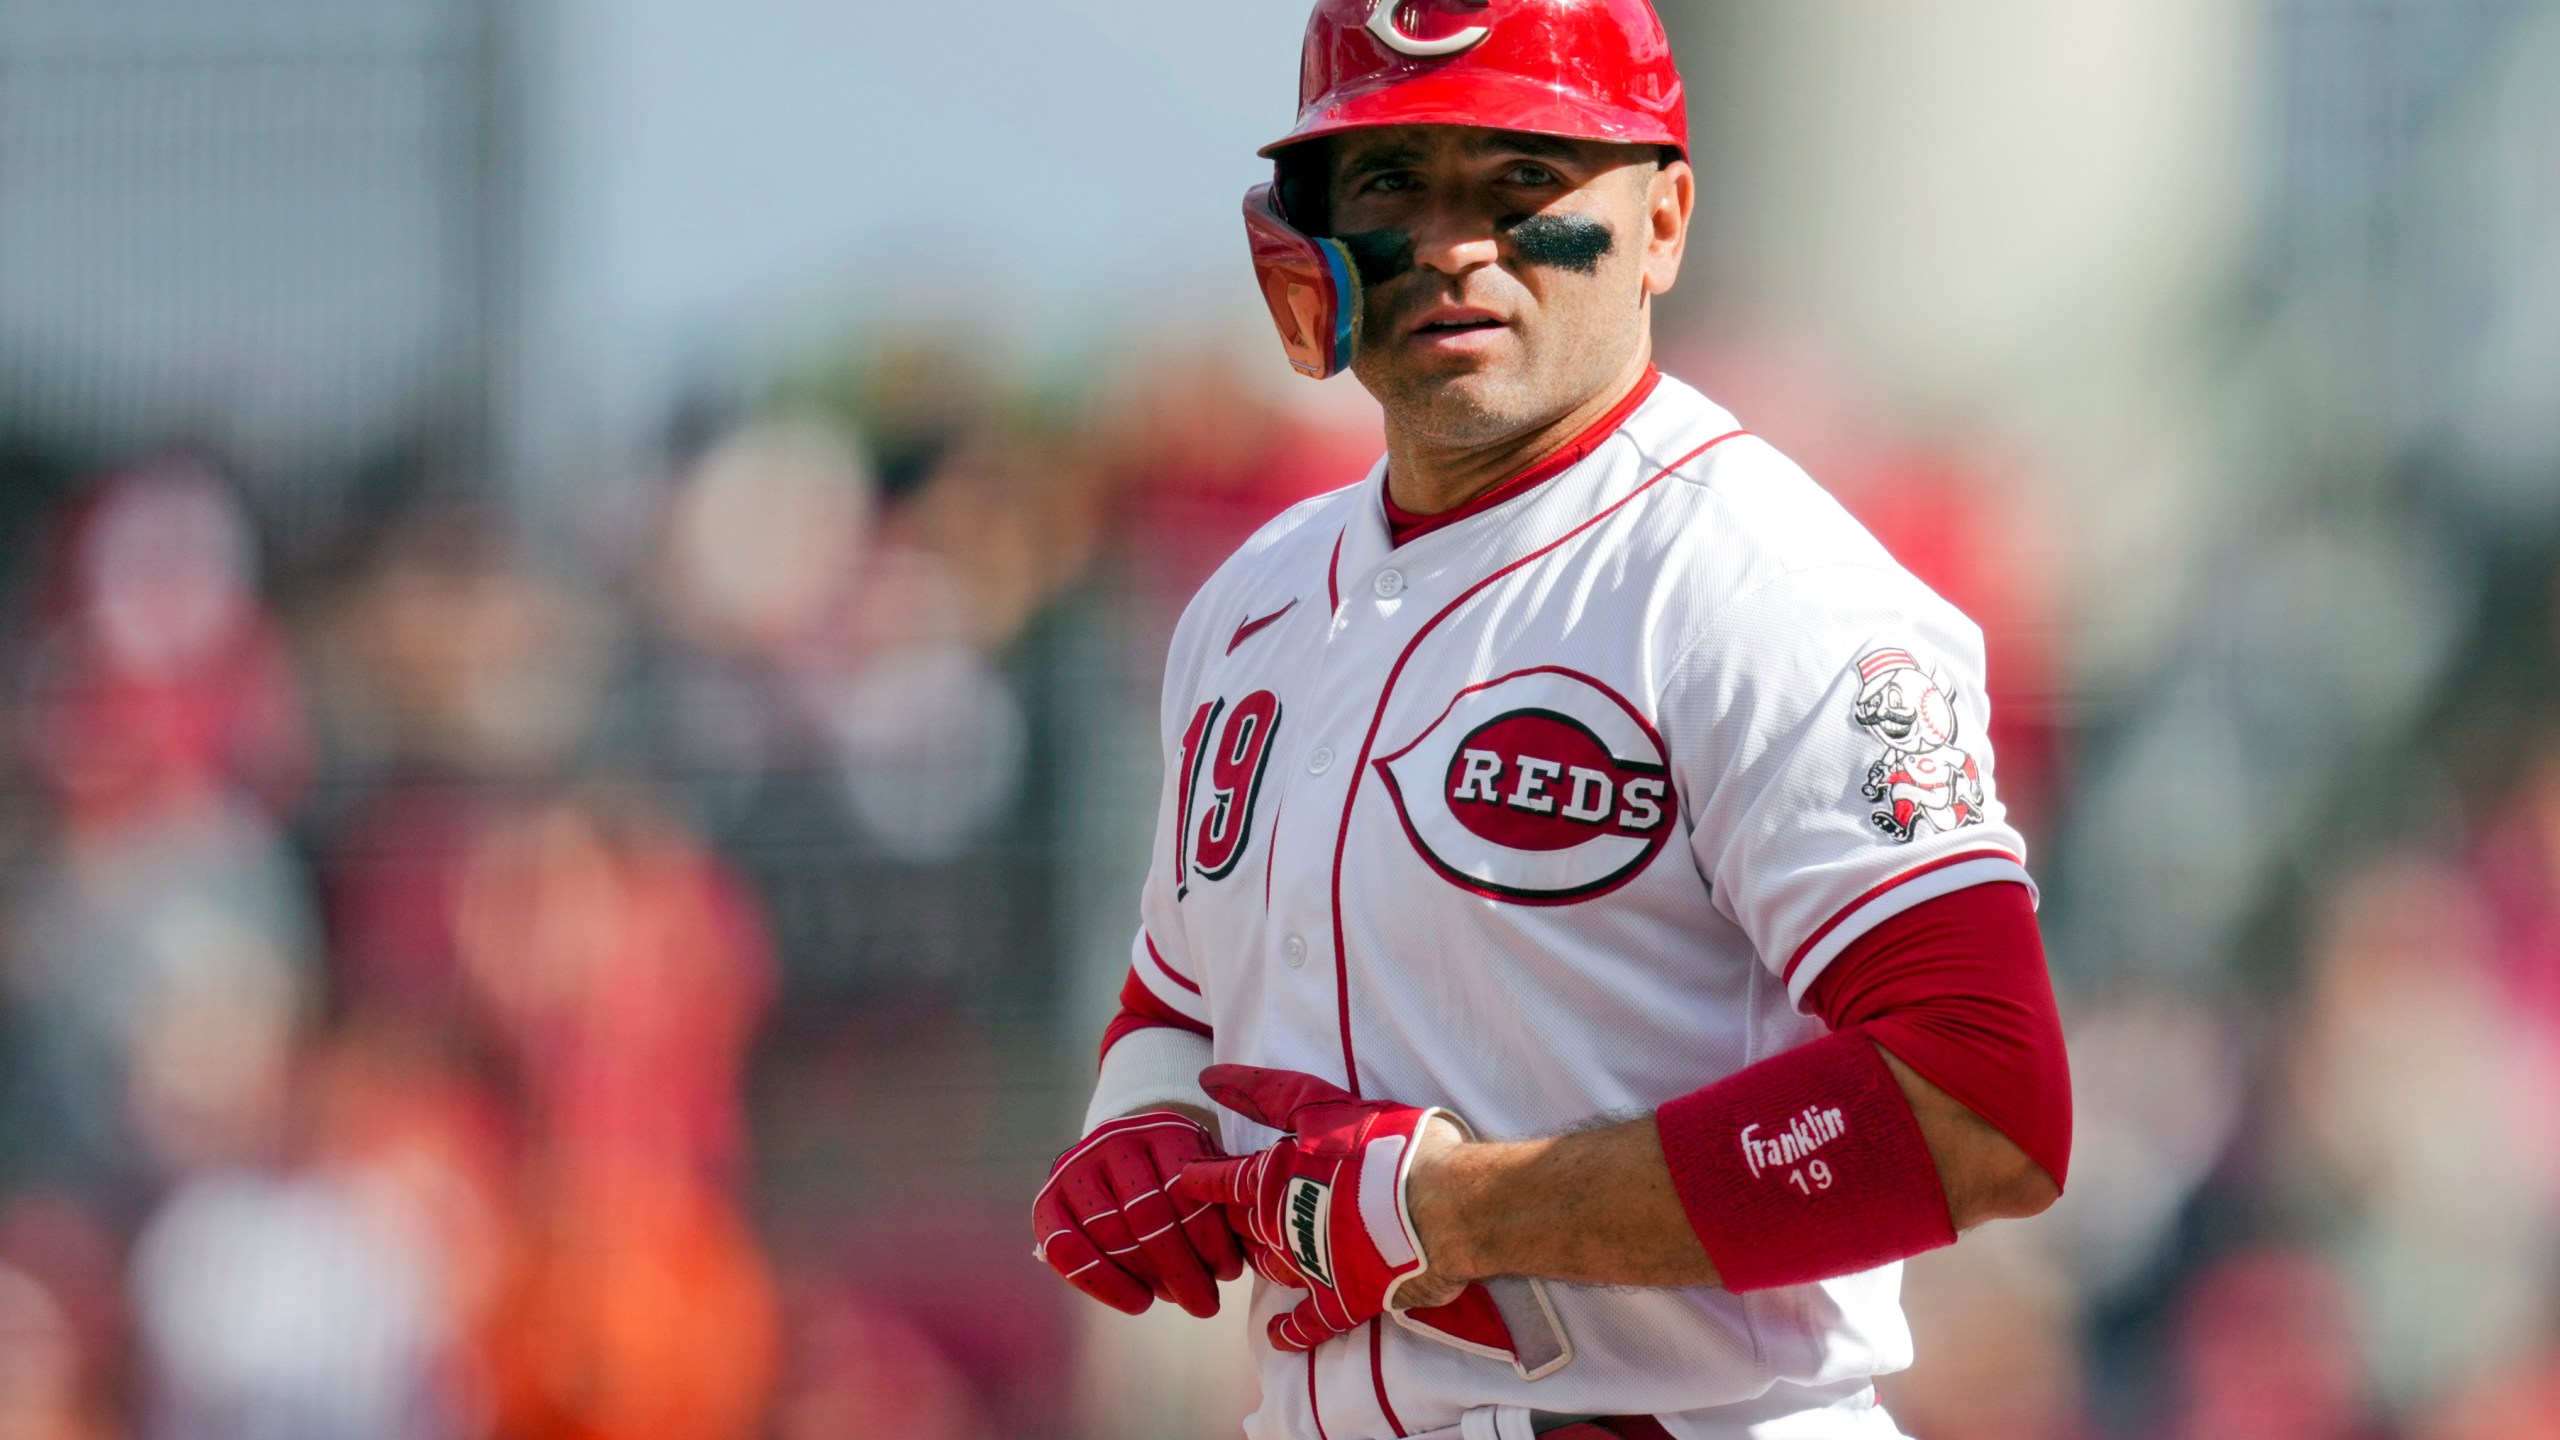 FILE - Cincinnati Reds' Joey Votto stands at first base after hitting a single during a baseball game against the Pittsburgh Pirates in Cincinnati, Sunday, Sept. 24, 2023. The former NL MVP says he has agreed to a minor league contract with his hometown Toronto Blue Jays. Votto, 40, became a free agent last fall after the end of a $251.5 million, 12-year contract with the Cincinnati Reds, his only team over 17 major league season. (AP Photo/Aaron Doster, File)